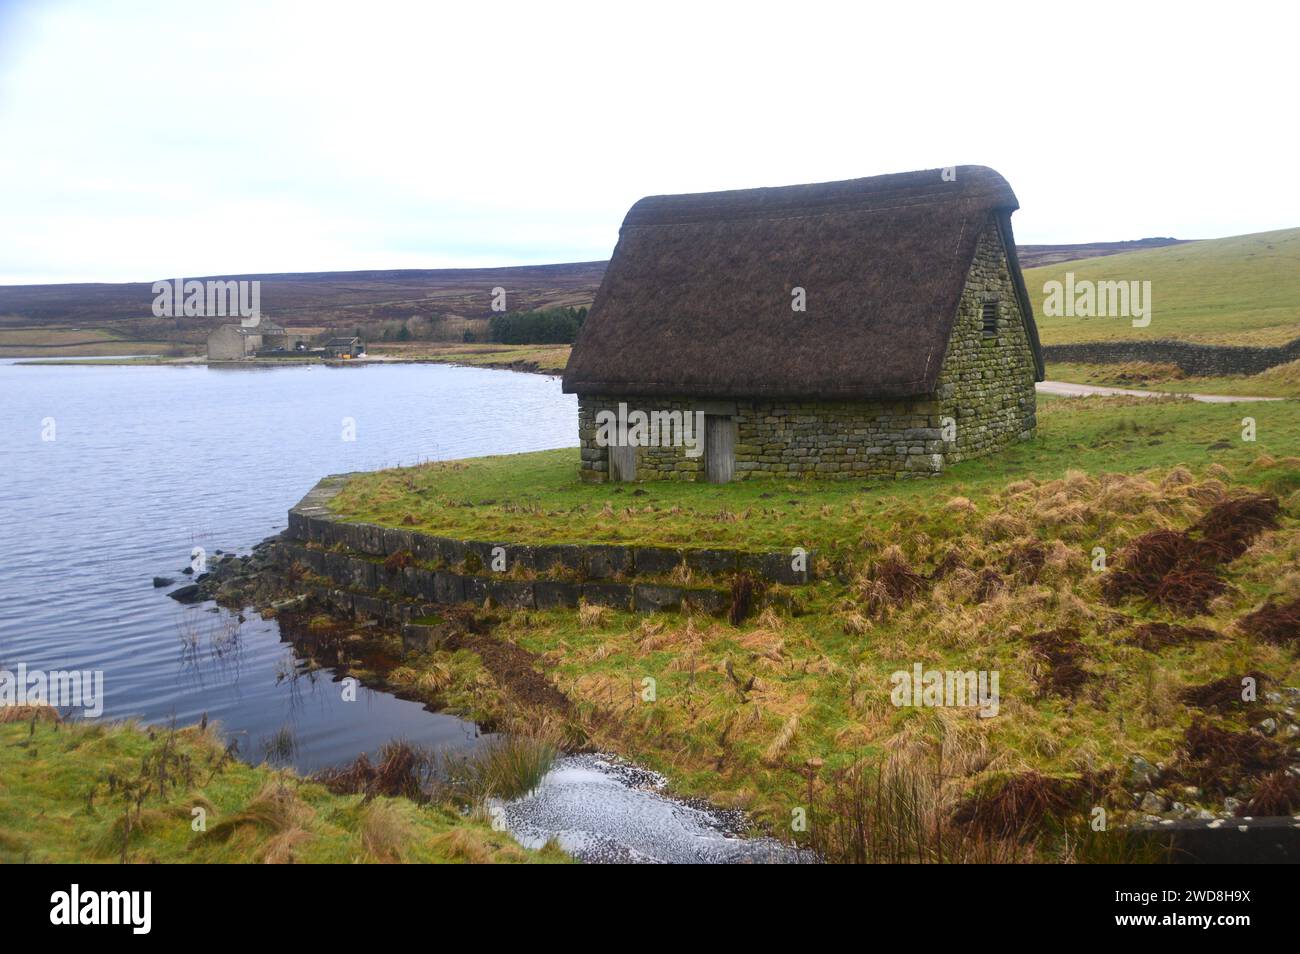 Grimwith High Laithe a  Restored 17th Century Thatched Cruck Barn on the Banks of Grimwith Reservoir in the Yorkshire Dales National Park, England, UK Stock Photo